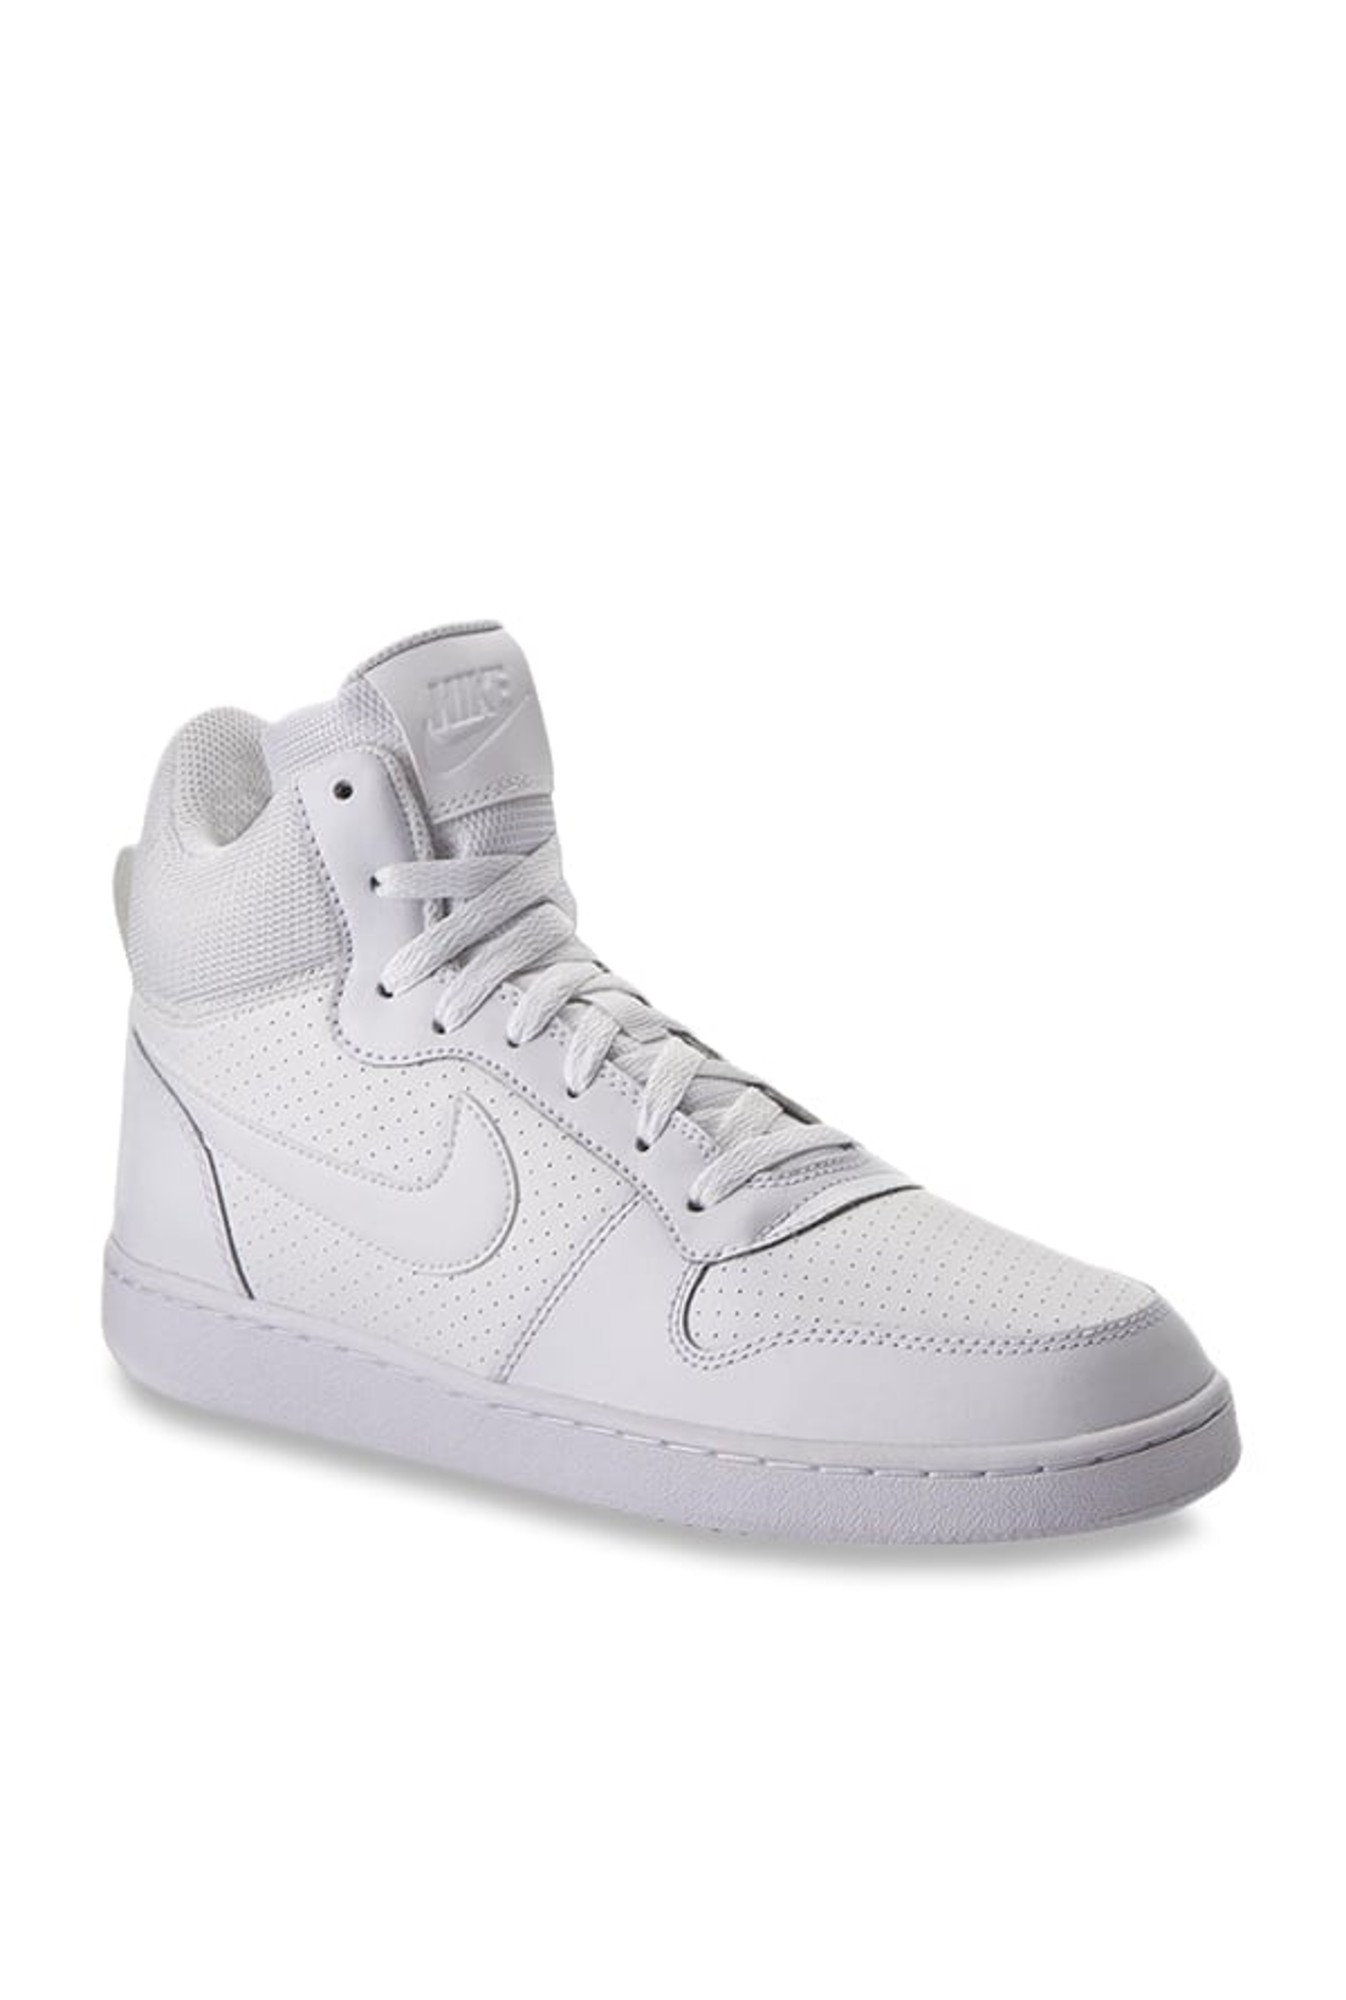 nike white ankle sneakers